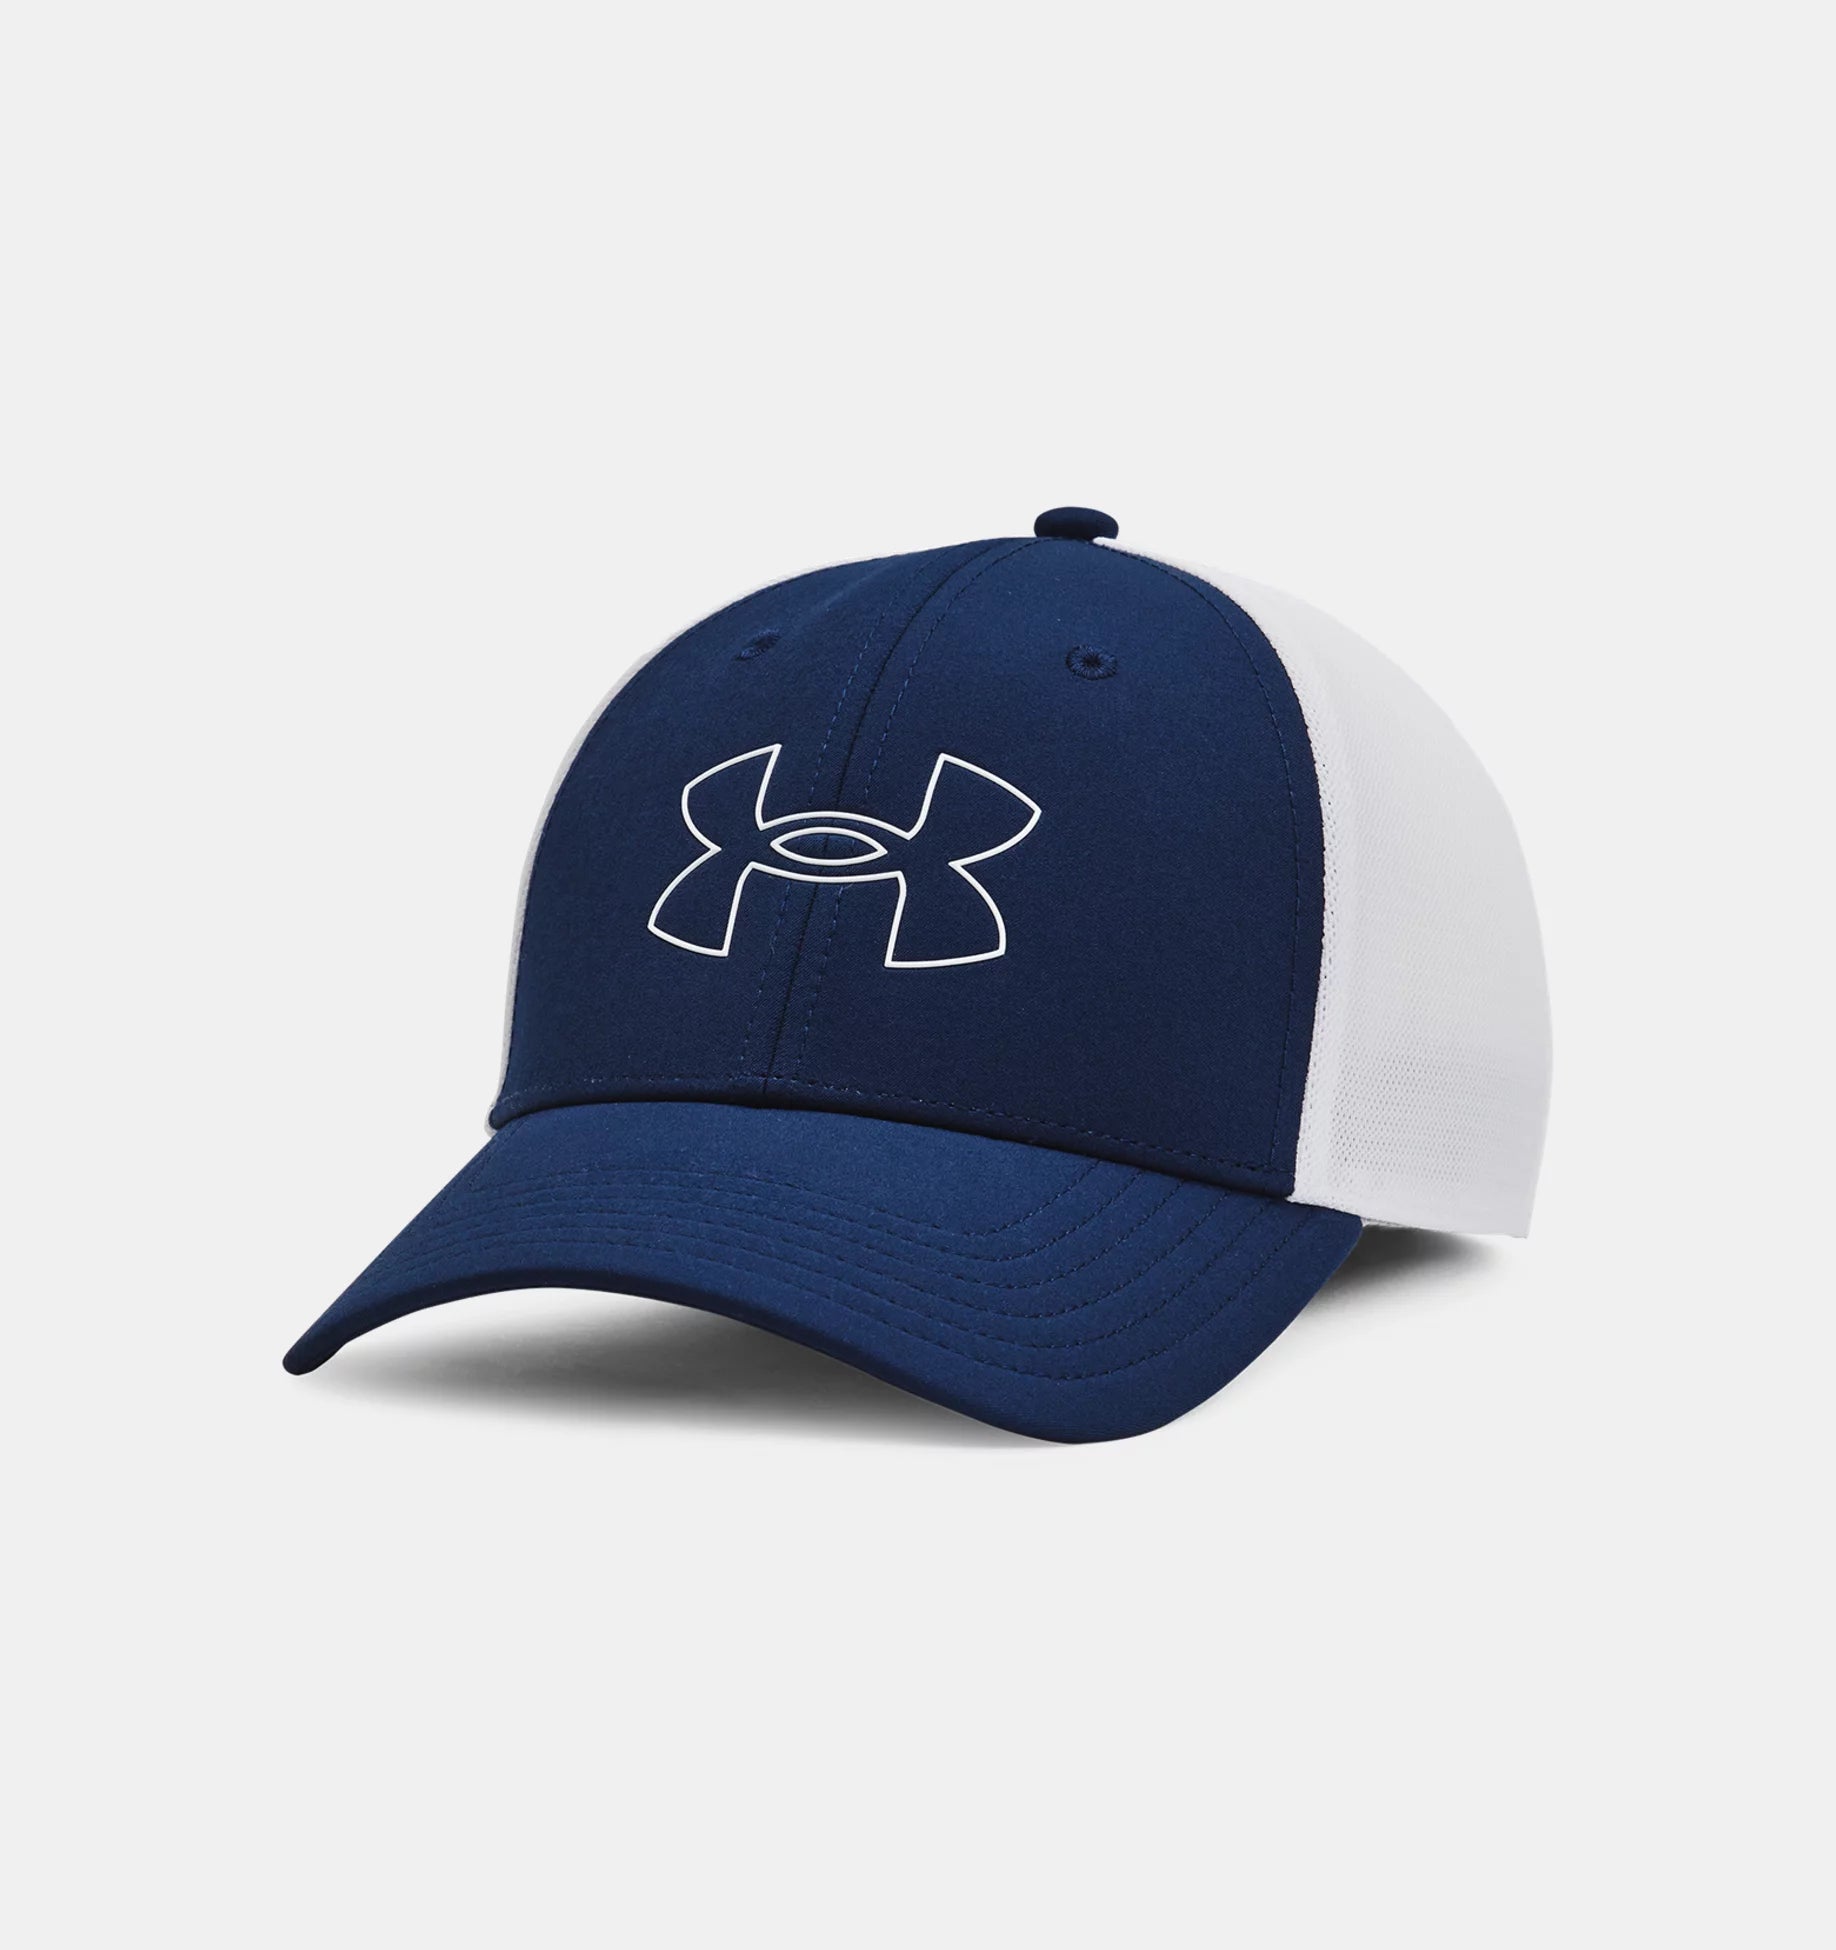 Under Armour Iso-Chill Driver Mesh Adjustable Cap - 1369805 409 - One Size  Fits Most / Academy Blue & White 408